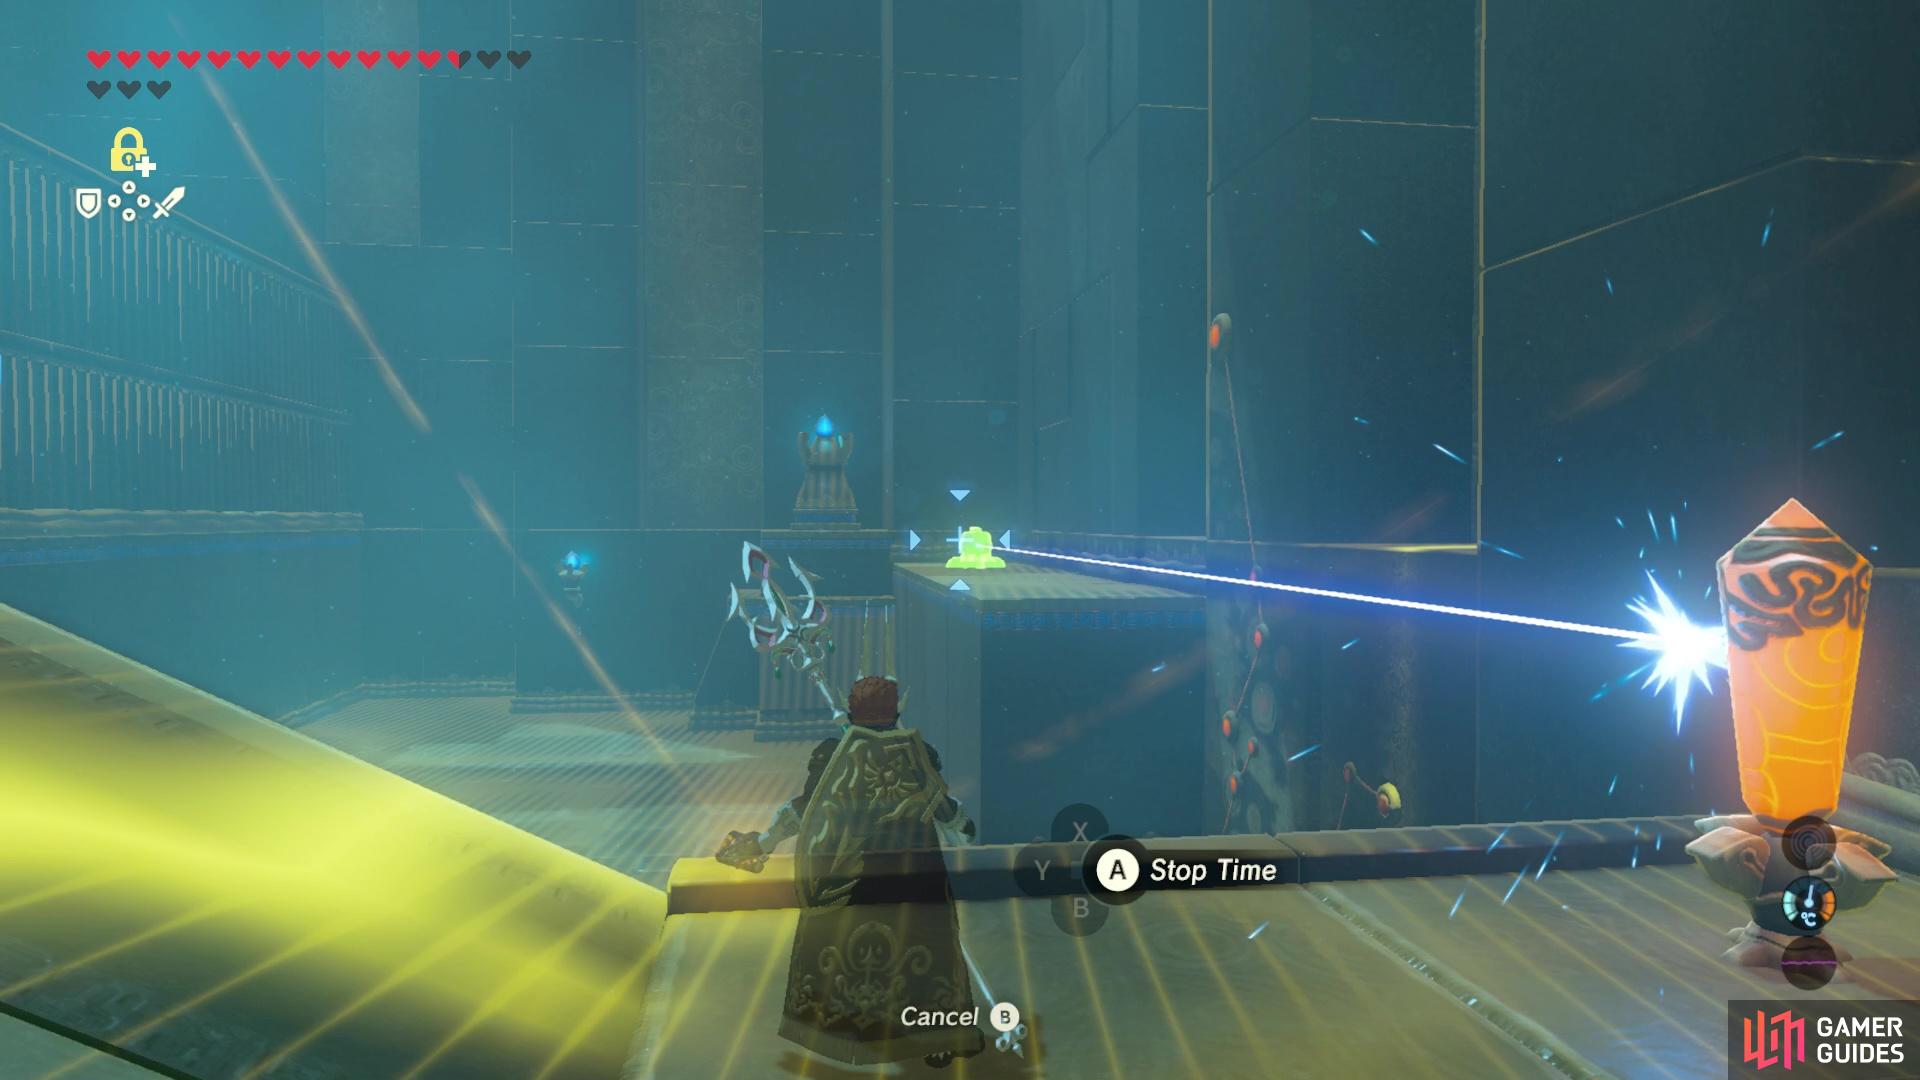 Use Stasis to temporarily disable the laser